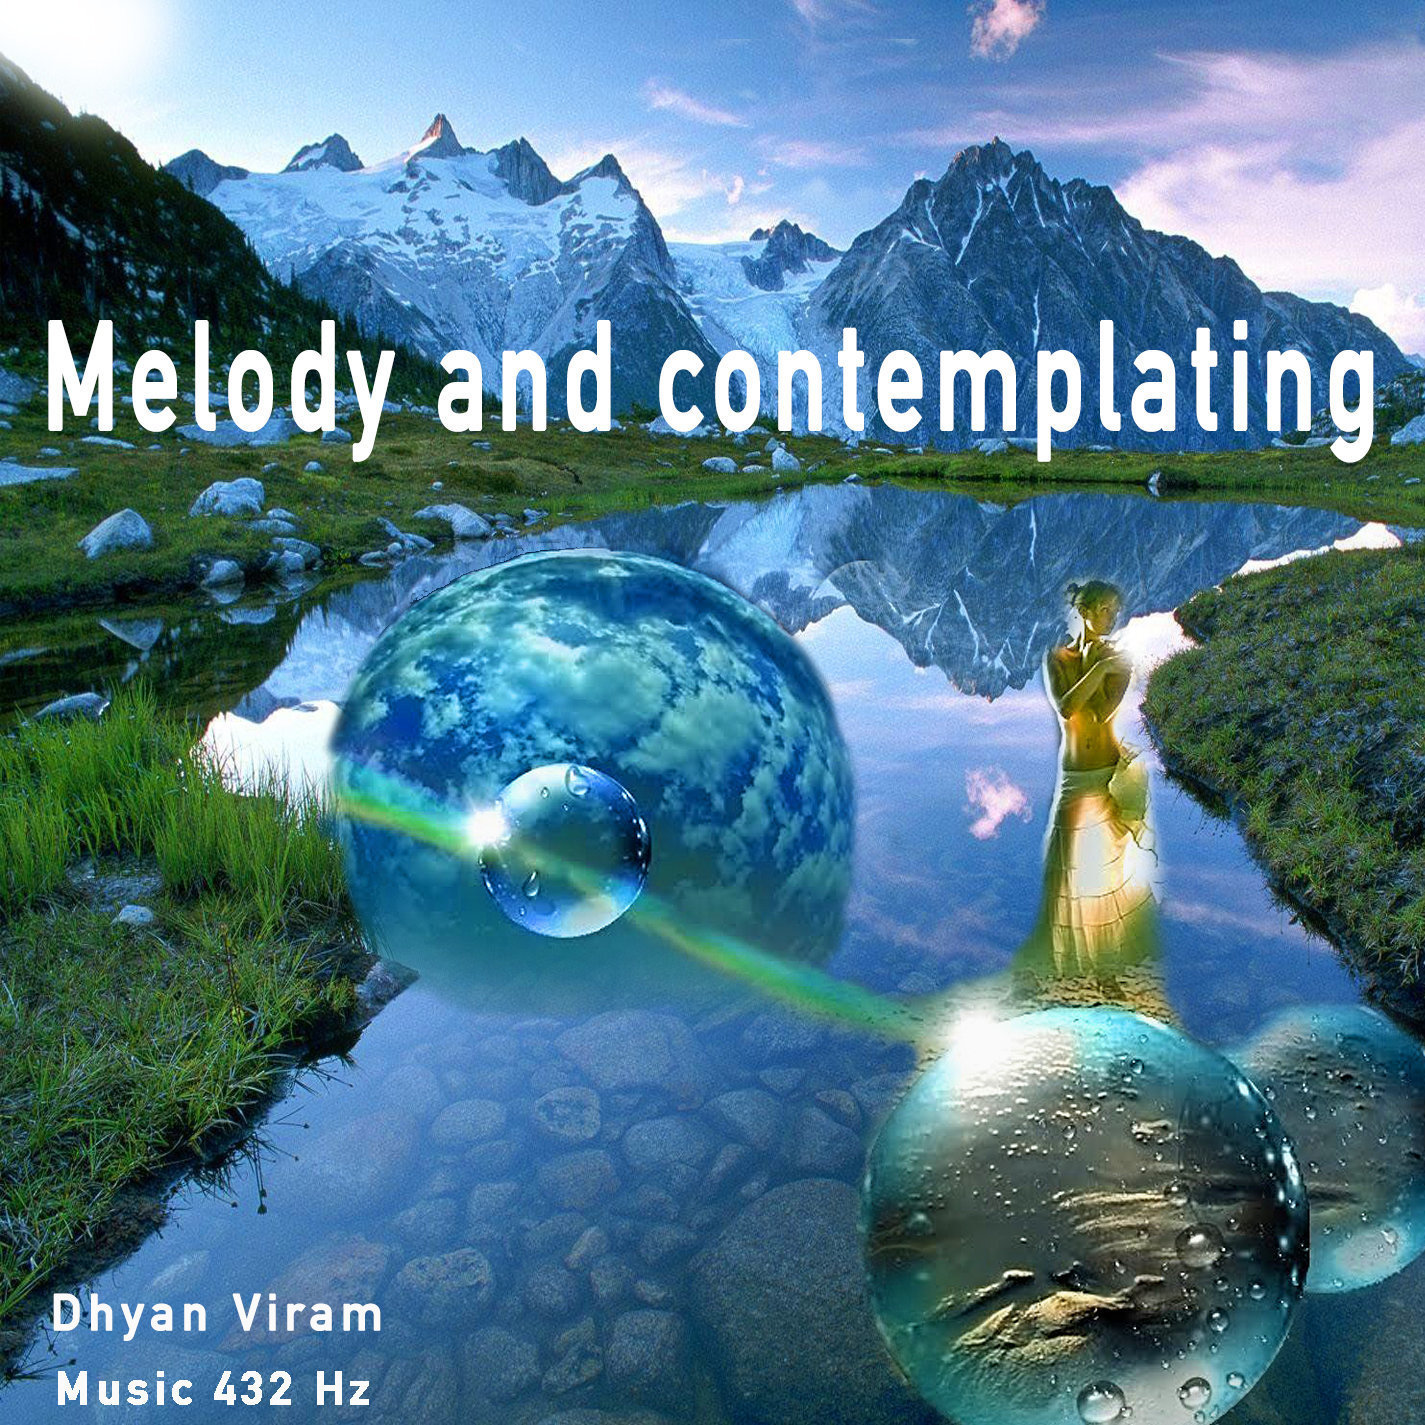 Melody and contemplating